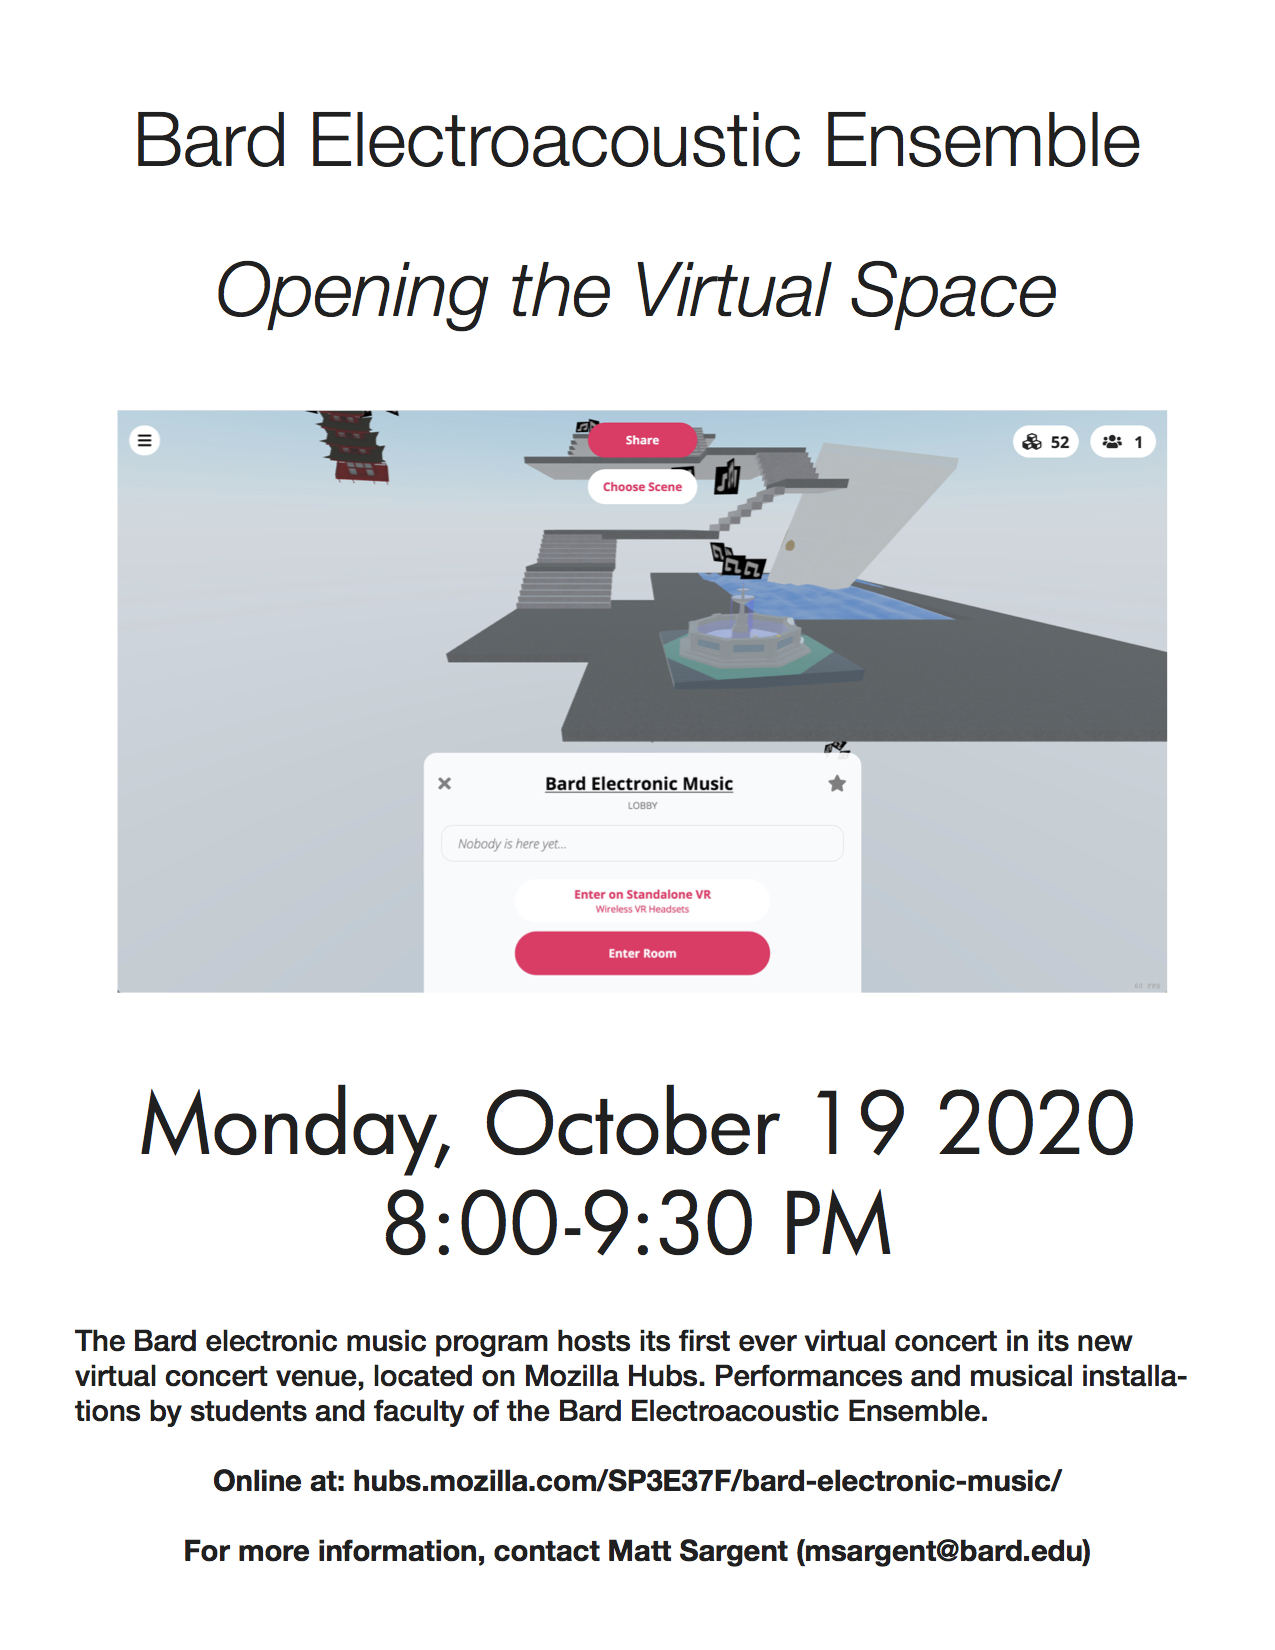 Bard Electroacoustic Ensemble presents: Opening the Virtual Space